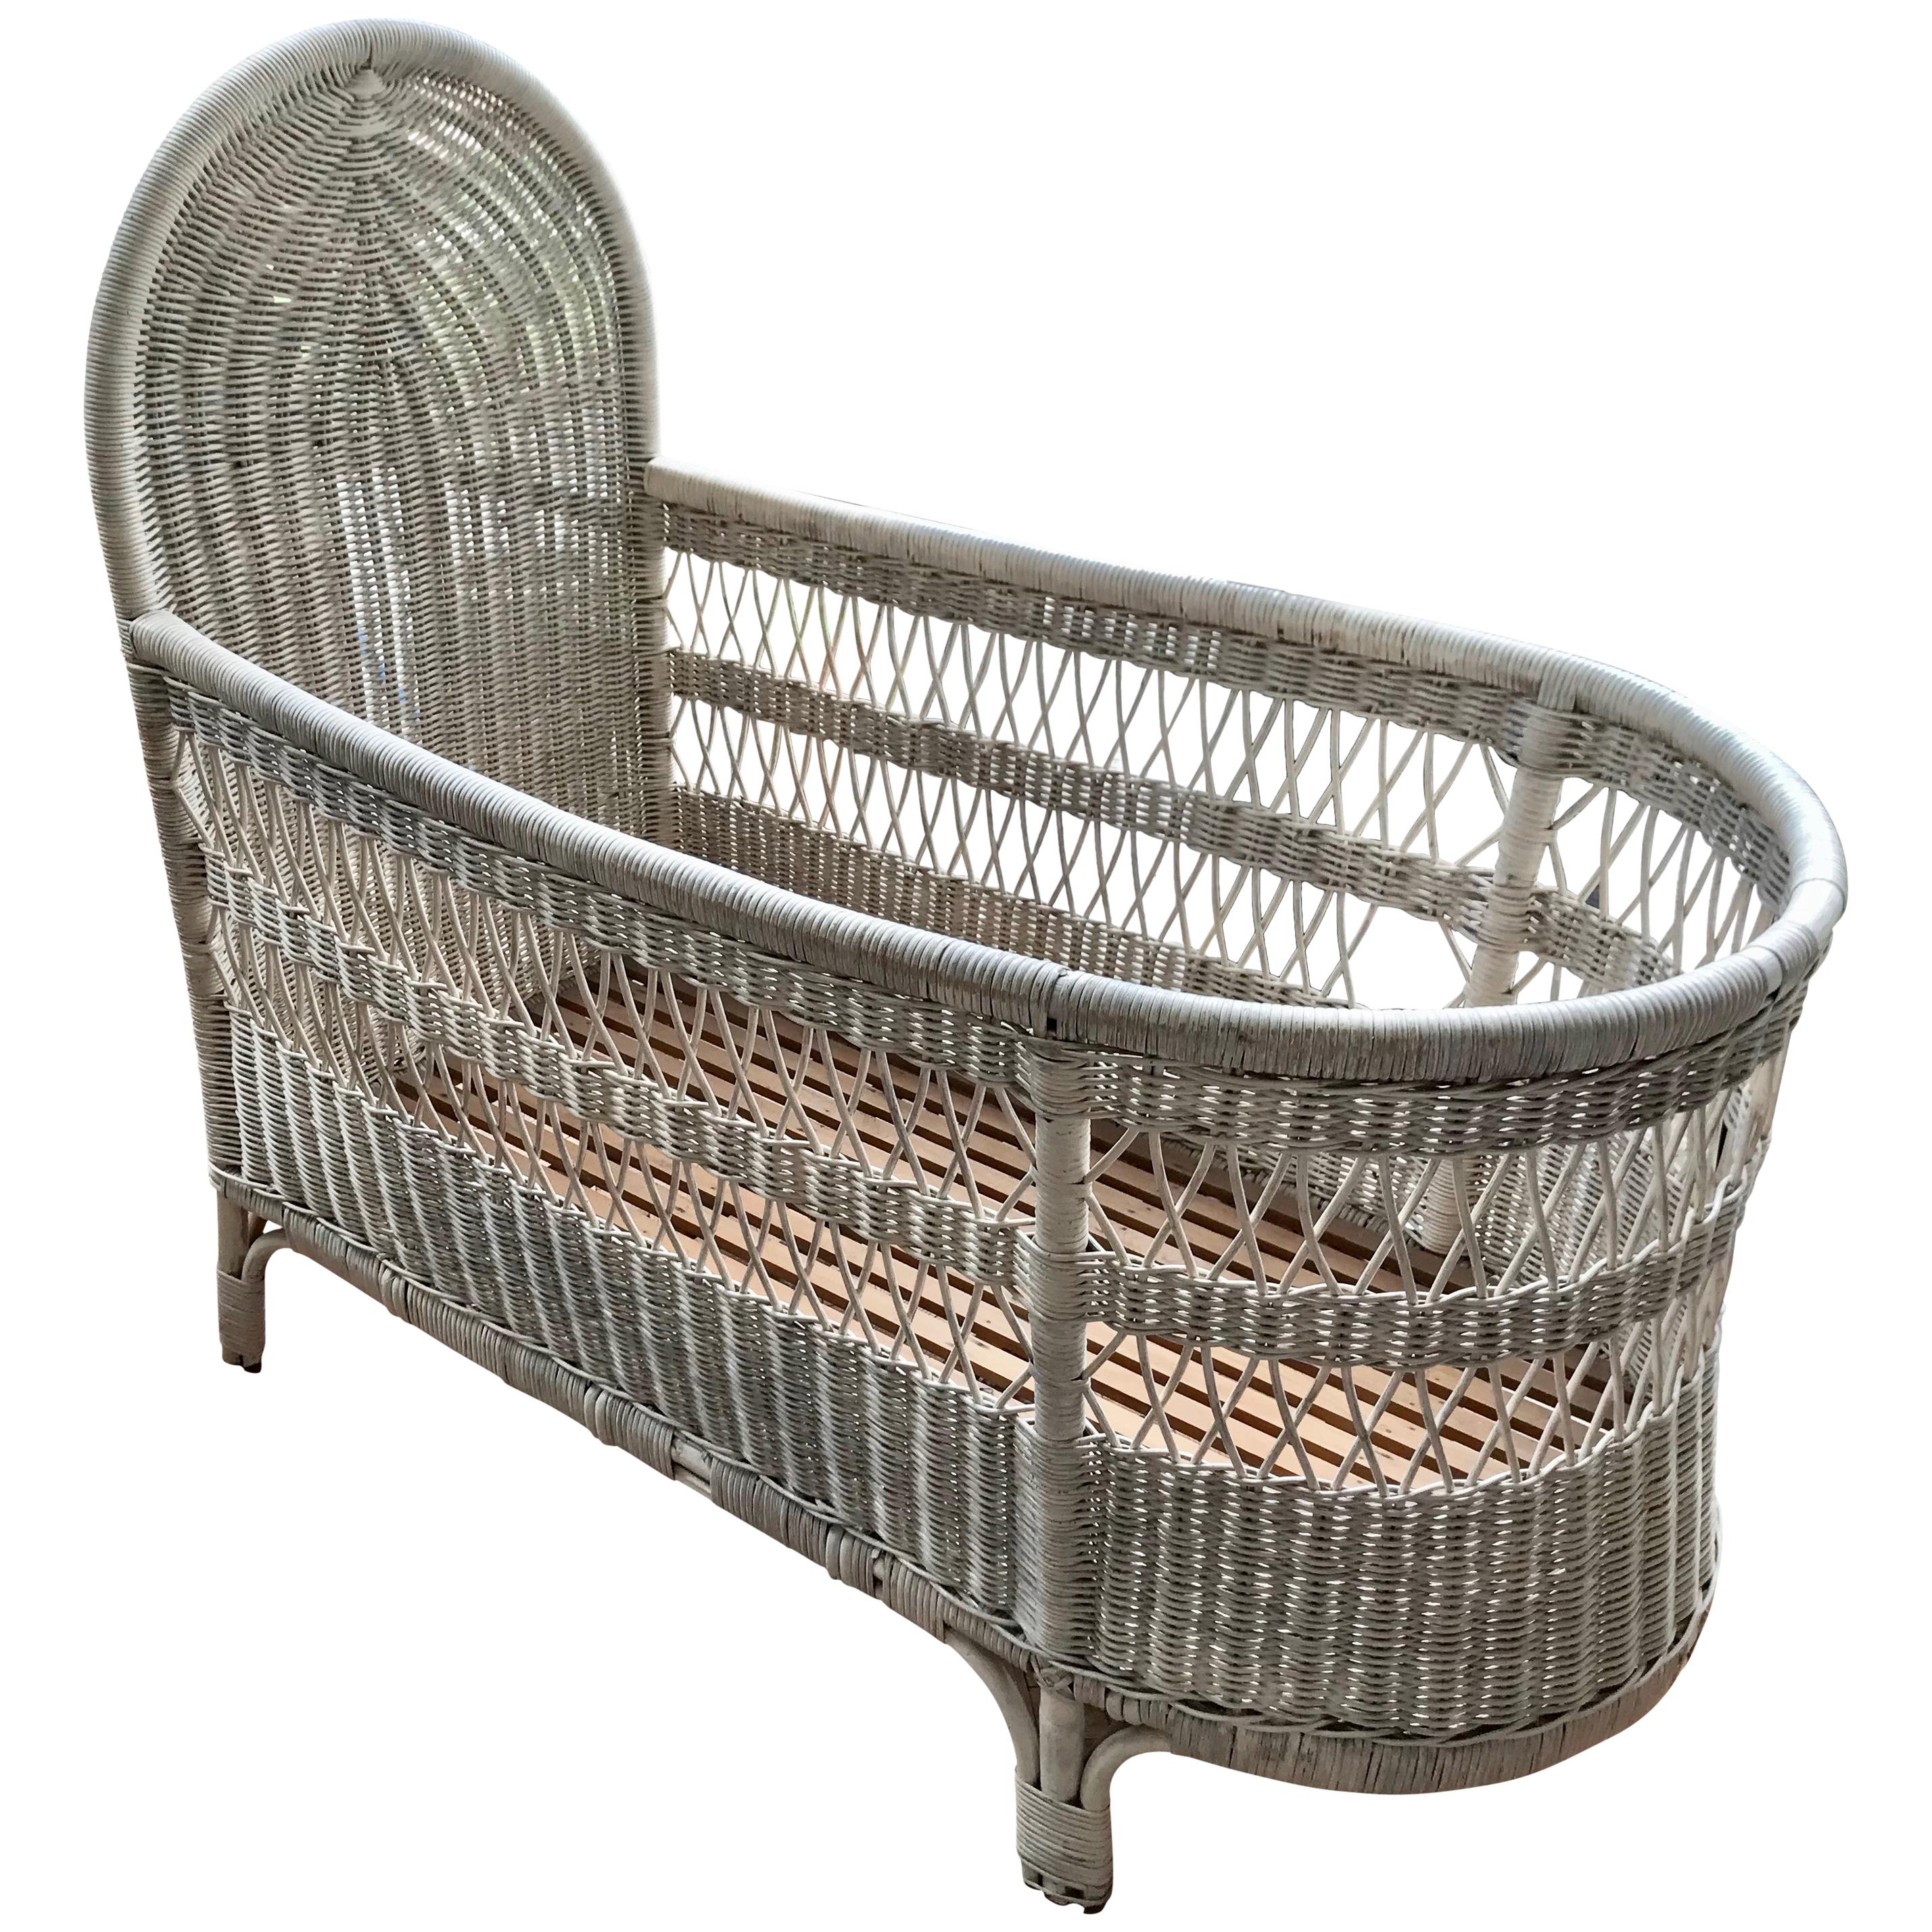 Vintage French Wicker Baby Bed/ Crib For Sale